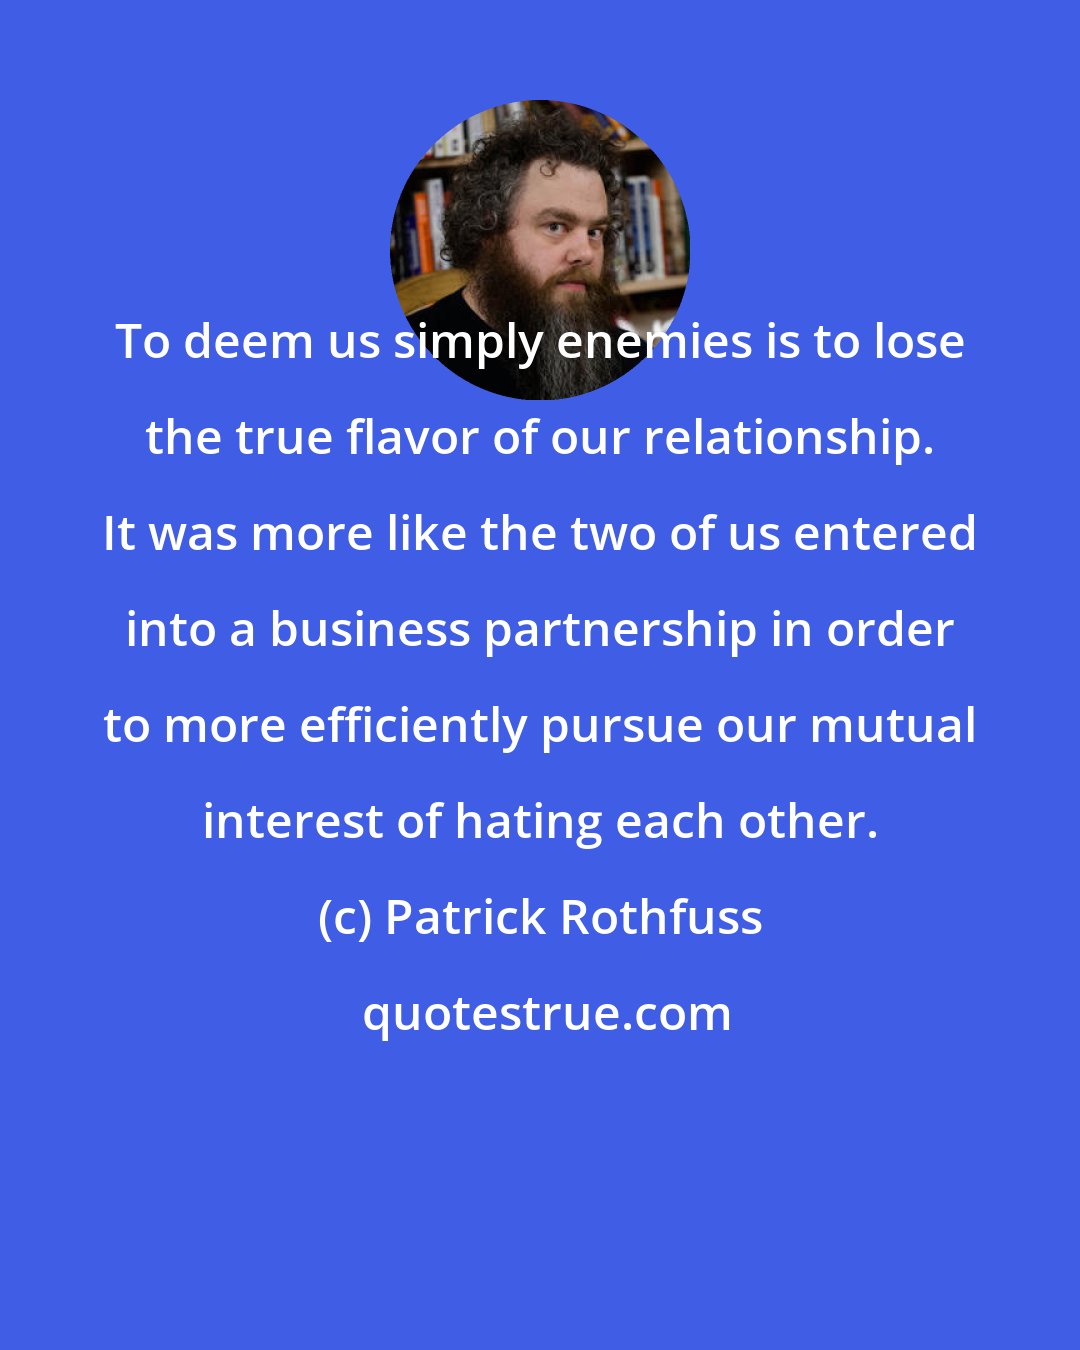 Patrick Rothfuss: To deem us simply enemies is to lose the true flavor of our relationship. It was more like the two of us entered into a business partnership in order to more efficiently pursue our mutual interest of hating each other.